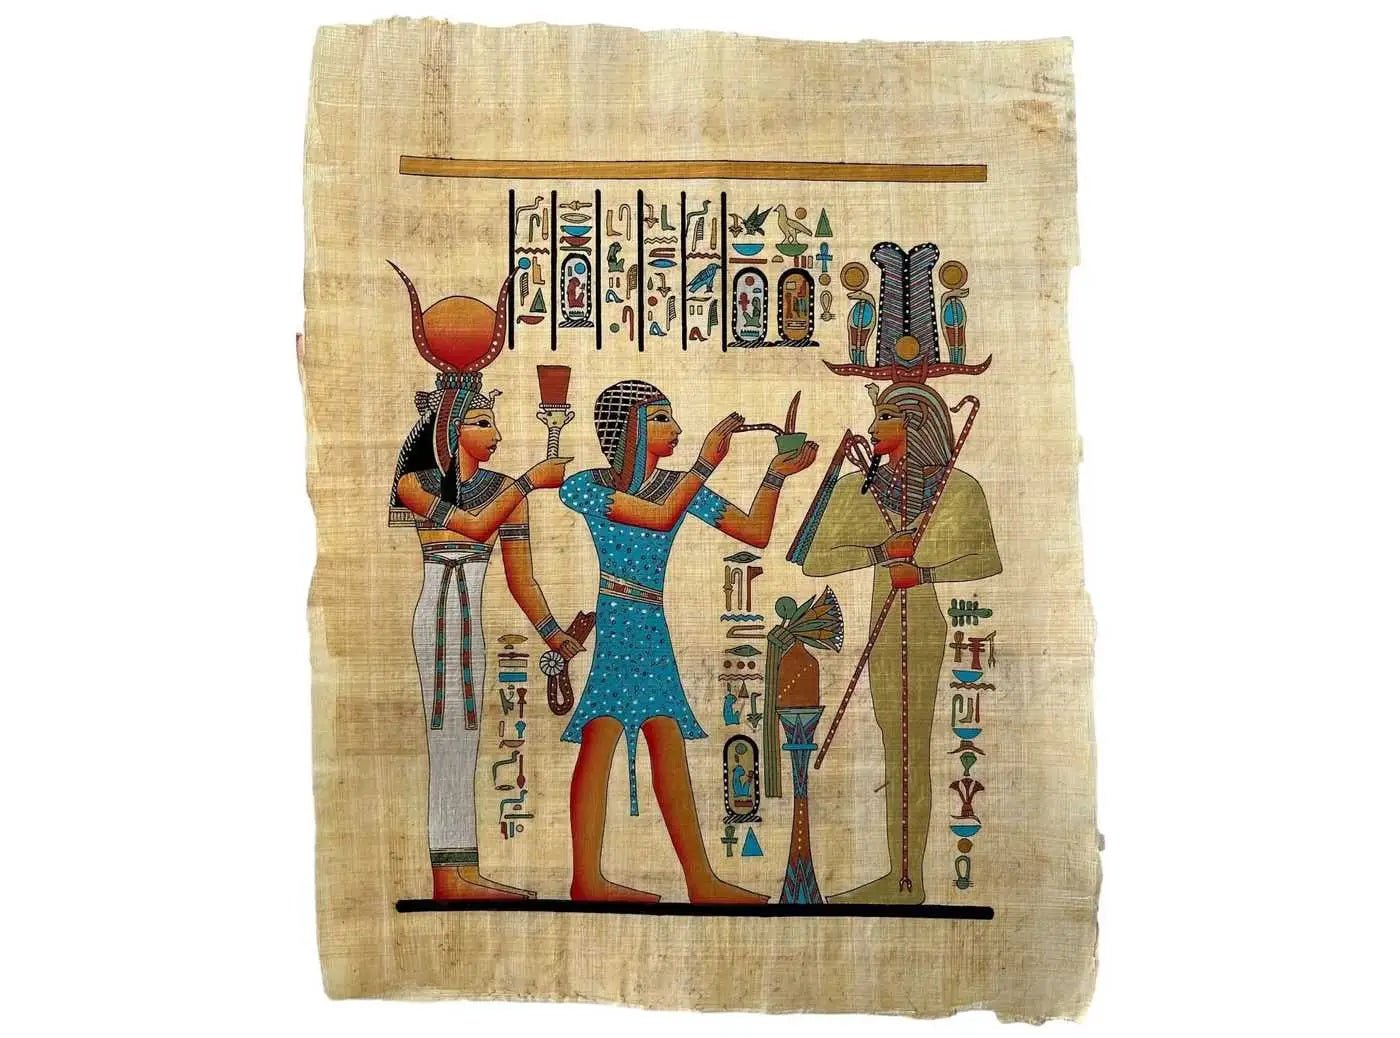 Art/ Authentic Paper Print Wall Art Printed in Papyrus Paper